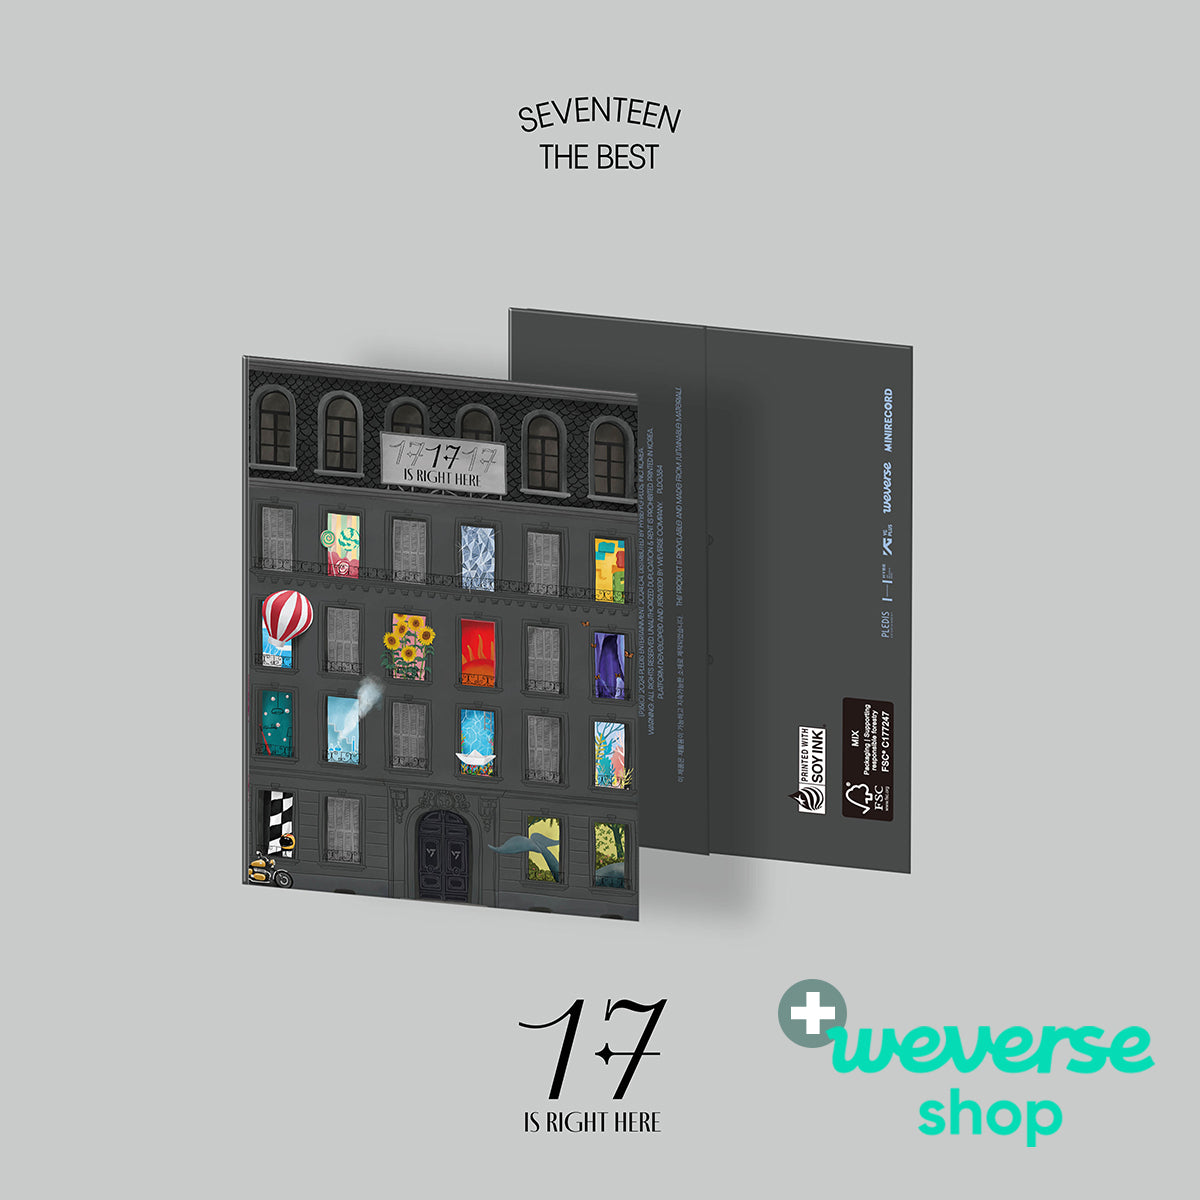 SEVENTEEN - 17 IS RIGHT HERE (Weverse Albums ver.) + Weverse Shop P.O.B [PRE-ORDER]